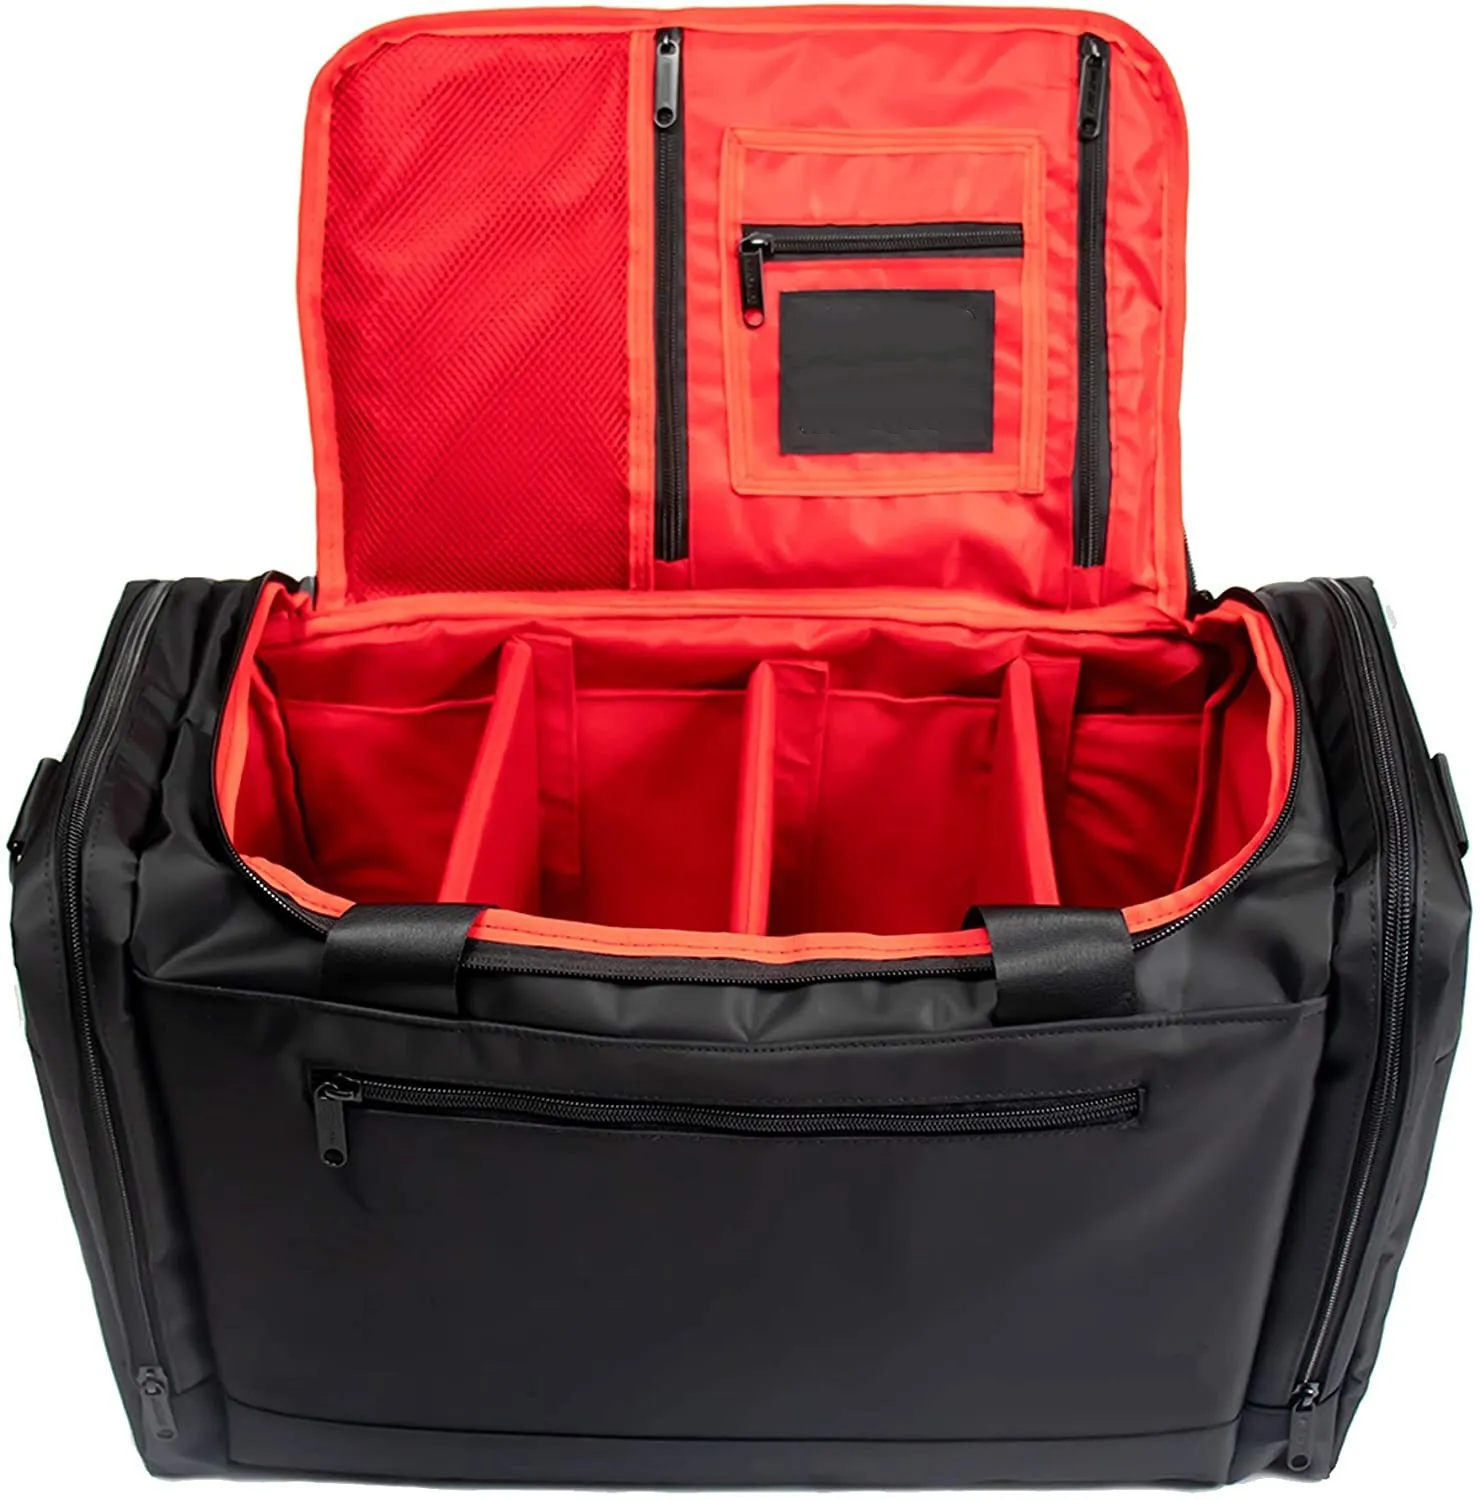 FREE SAMPLE Premium Sneaker Bag & Travel Duffel Bag - 3 adjustable compartment dividers - For shoes, clothing and gym